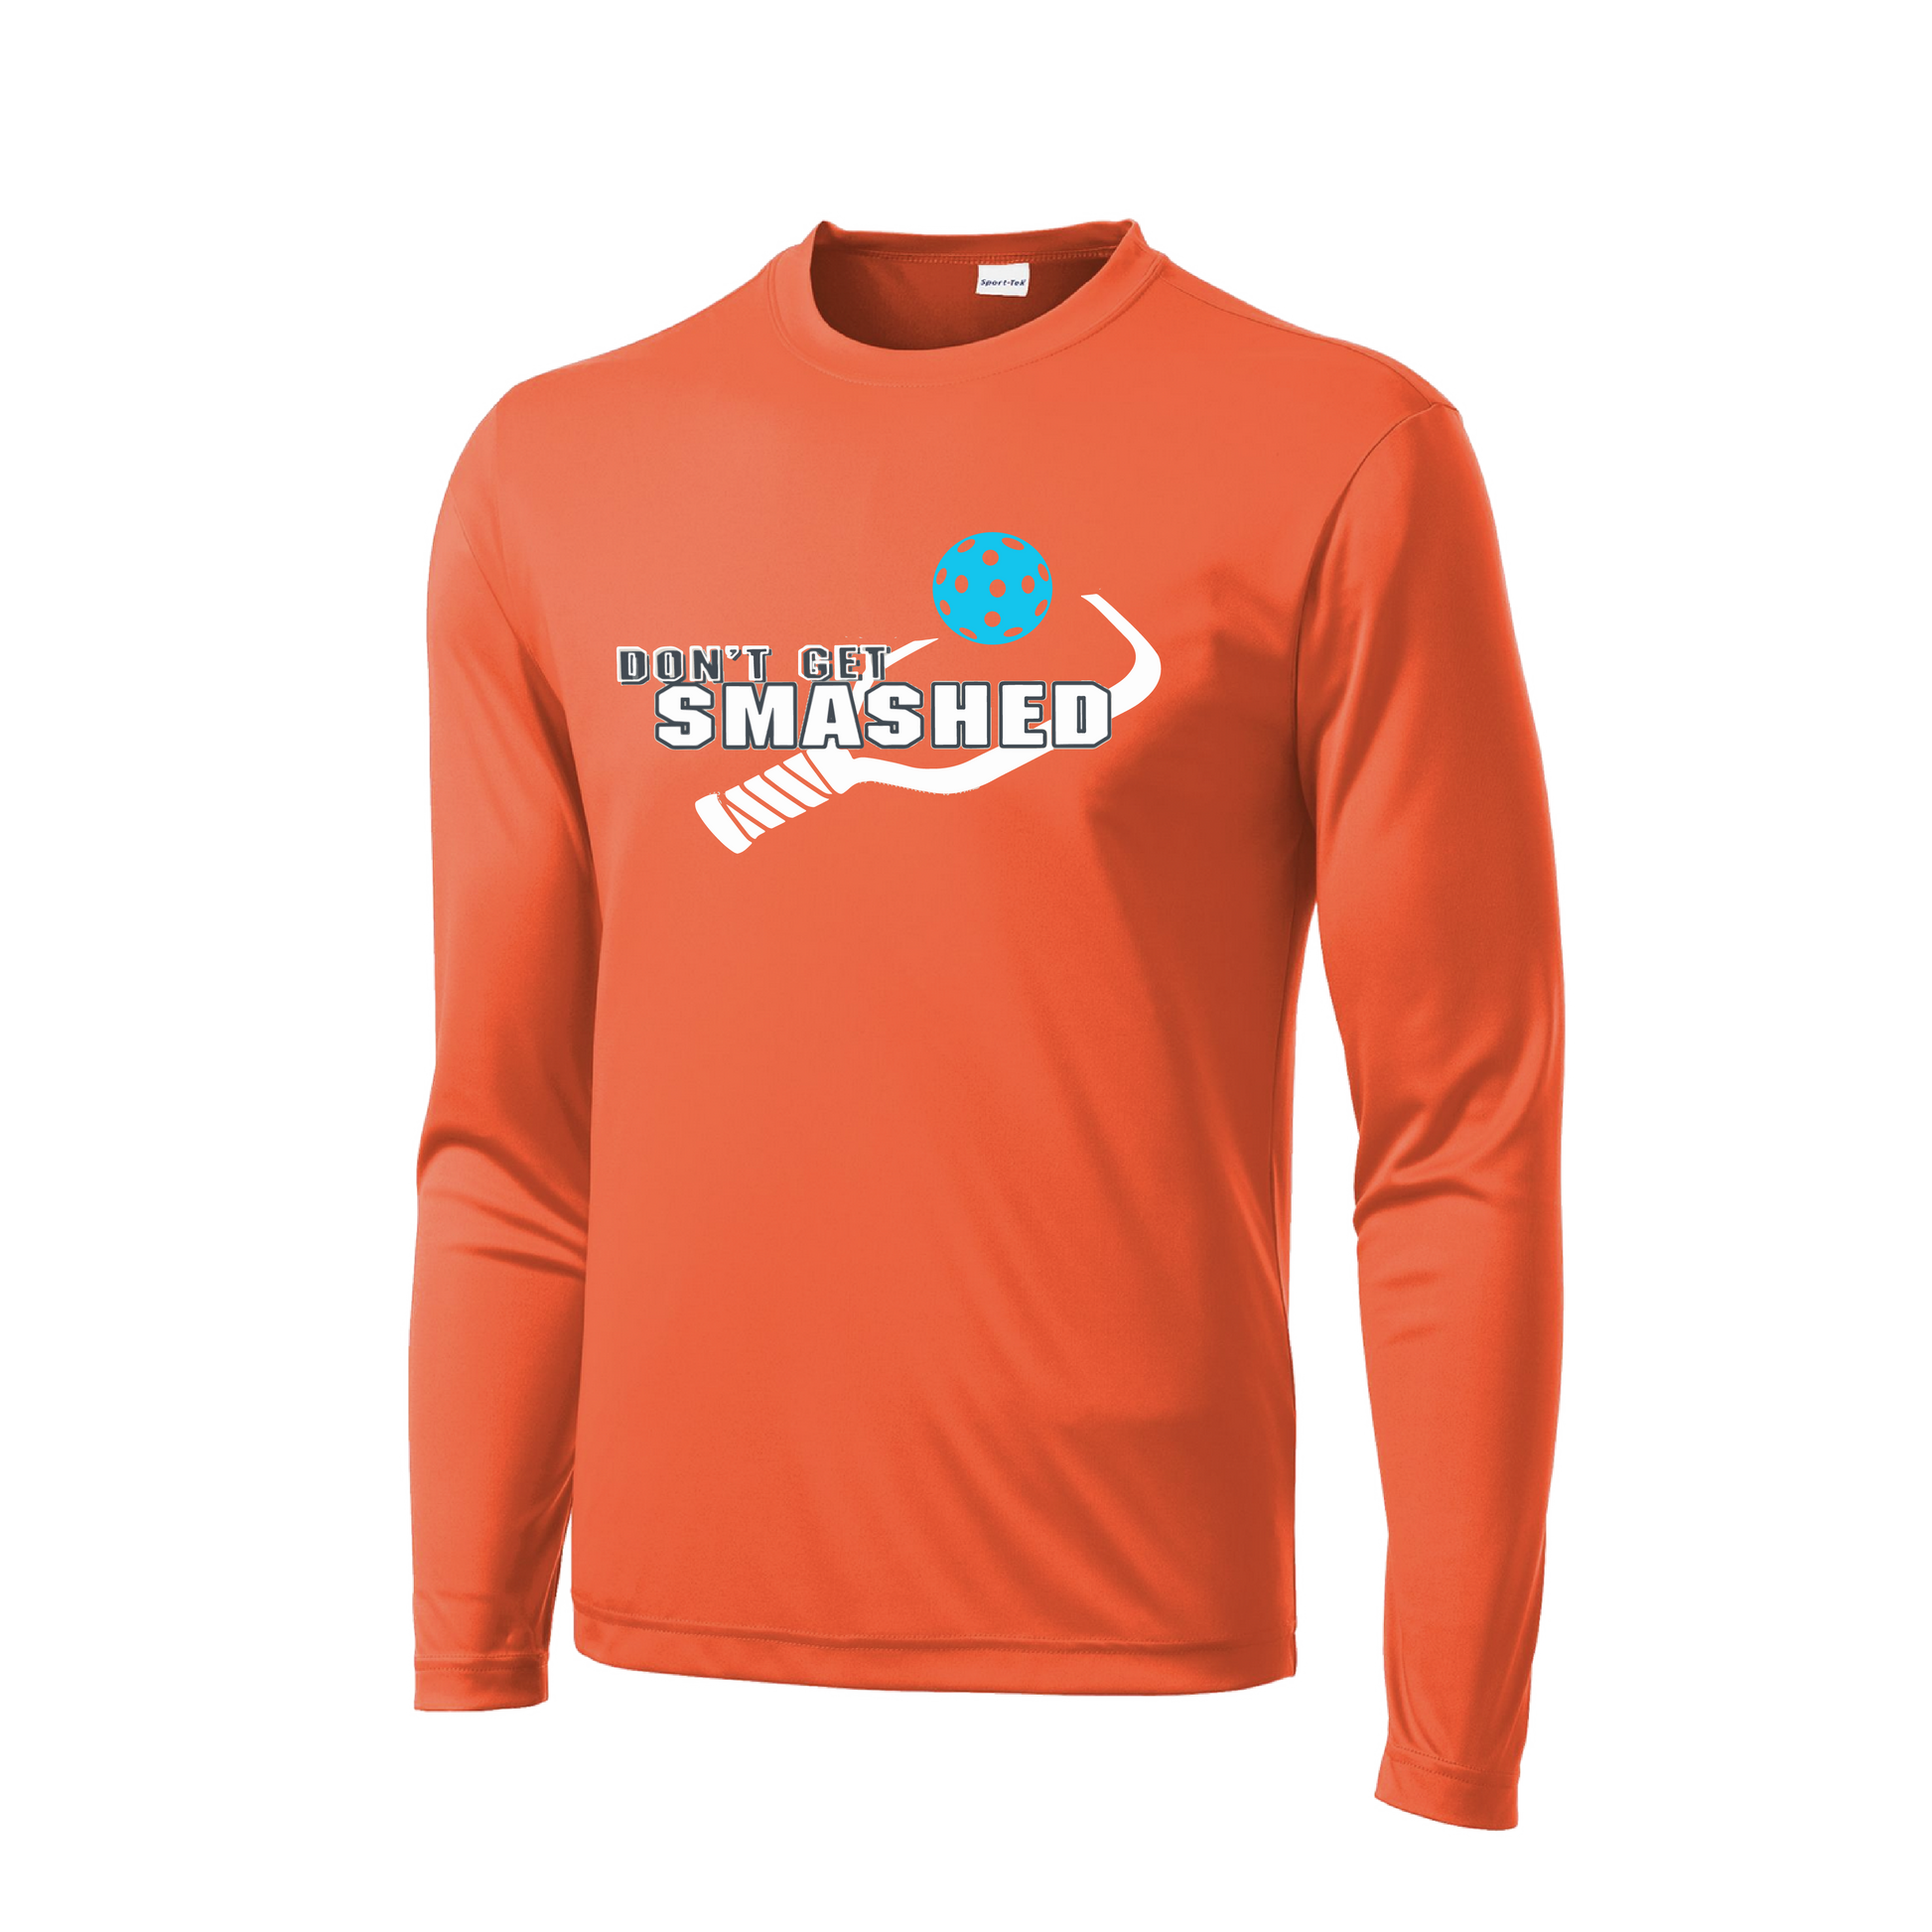 This lightweight, roomy and highly breathable Men's long-sleeved shirt is an athletic performance must-have! Boasting PosiCharge technology to keep your colors vibrant and logo looking new, it also has a removable tag and set-in sleeves for unbeatable comfort. Pickleball colors include cyan, orange, or pink.